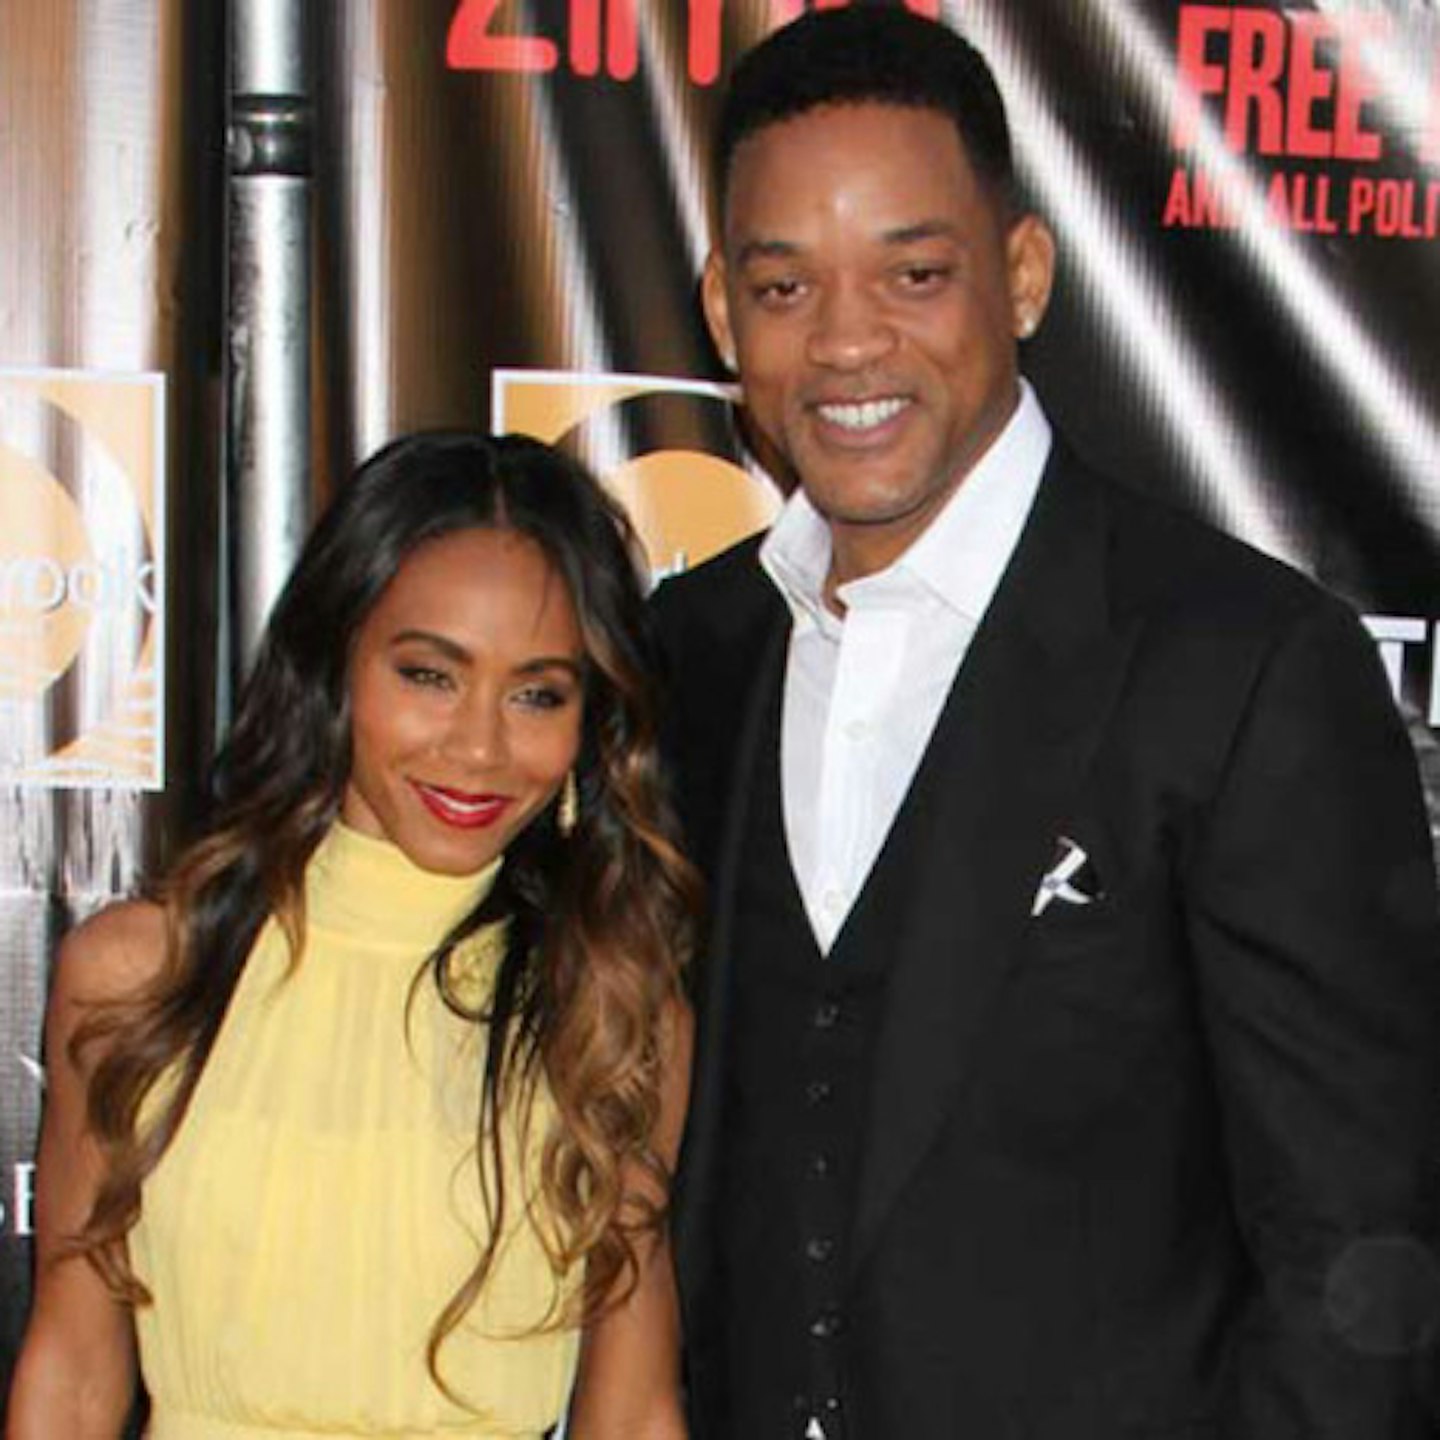 Will and Jada have't passed comment about the picture of Willow